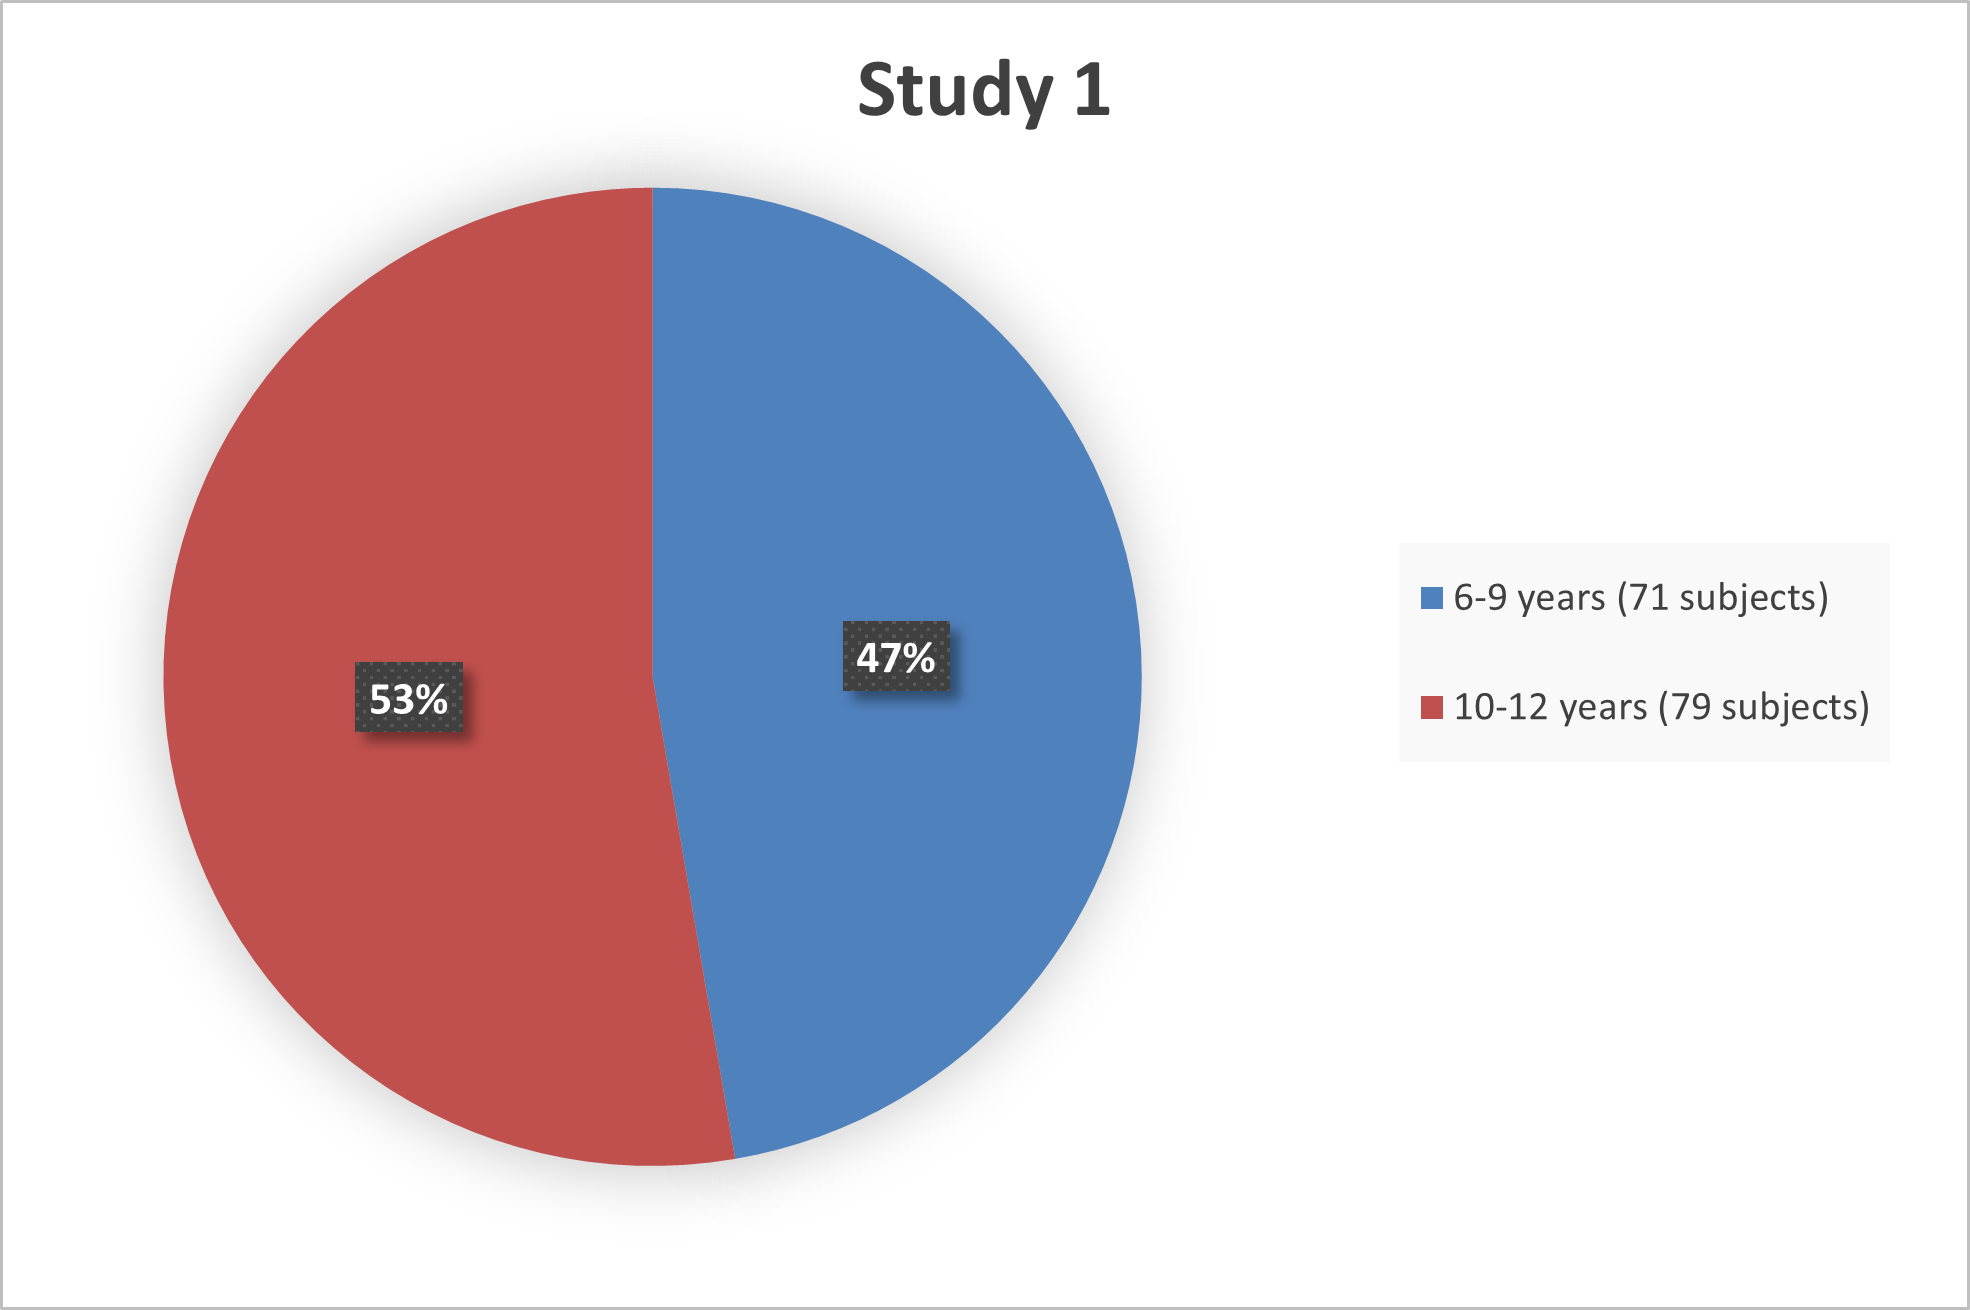 Figures 5 summarize the percentage of patients by age that were enrolled in trials used to evaluate the efficacy and safety of AZSTARYS